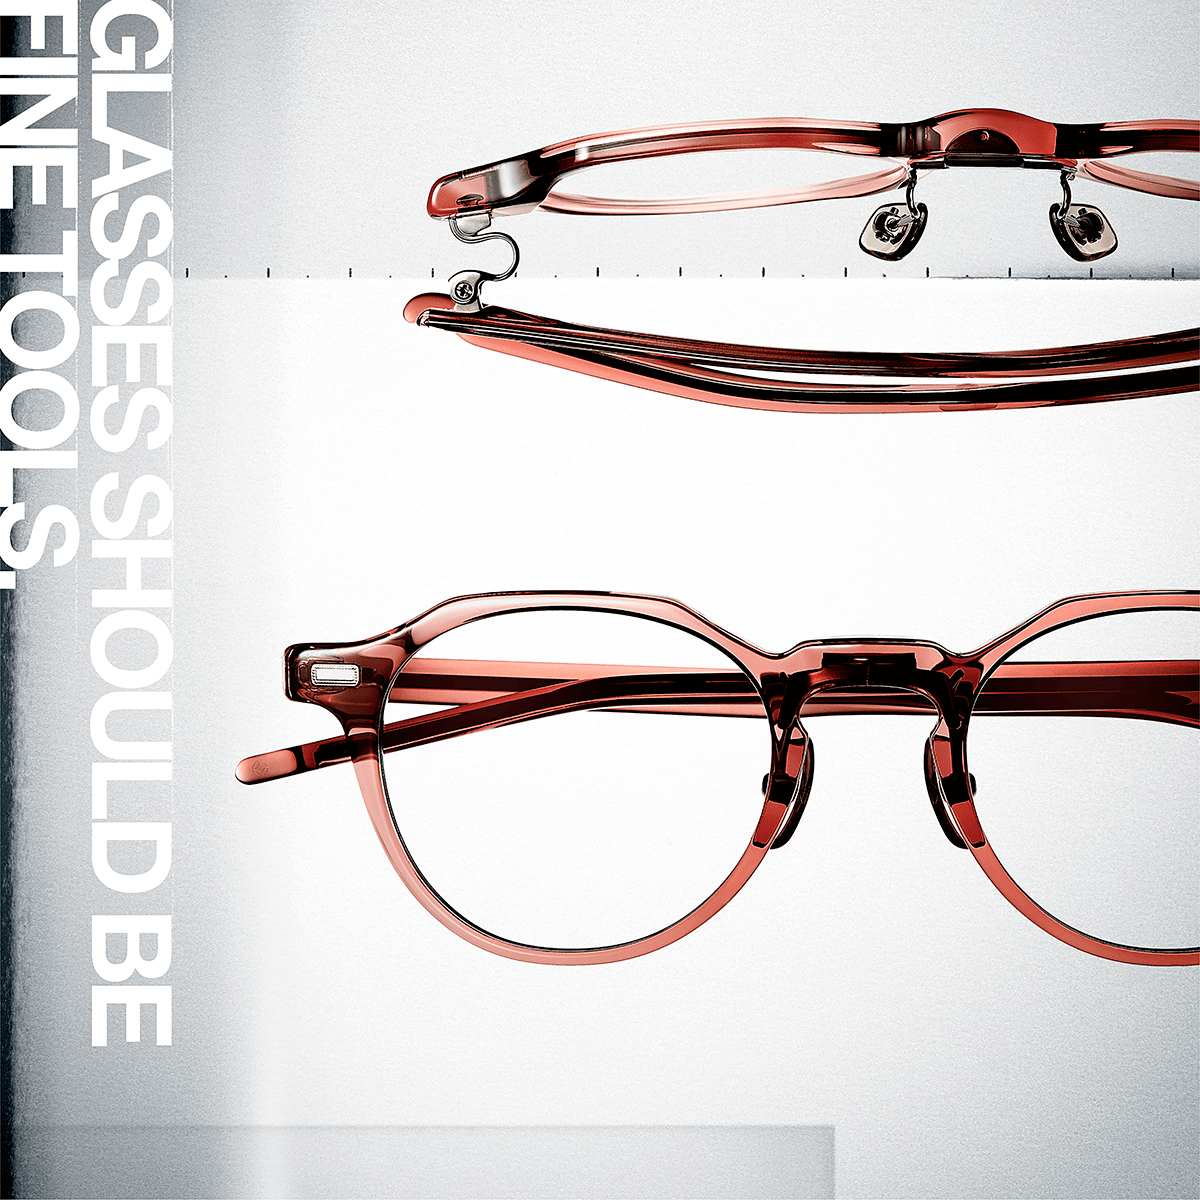 NP-750 series｜NEW COLLECTION 2023 SPRING｜999.9 フォーナインズ